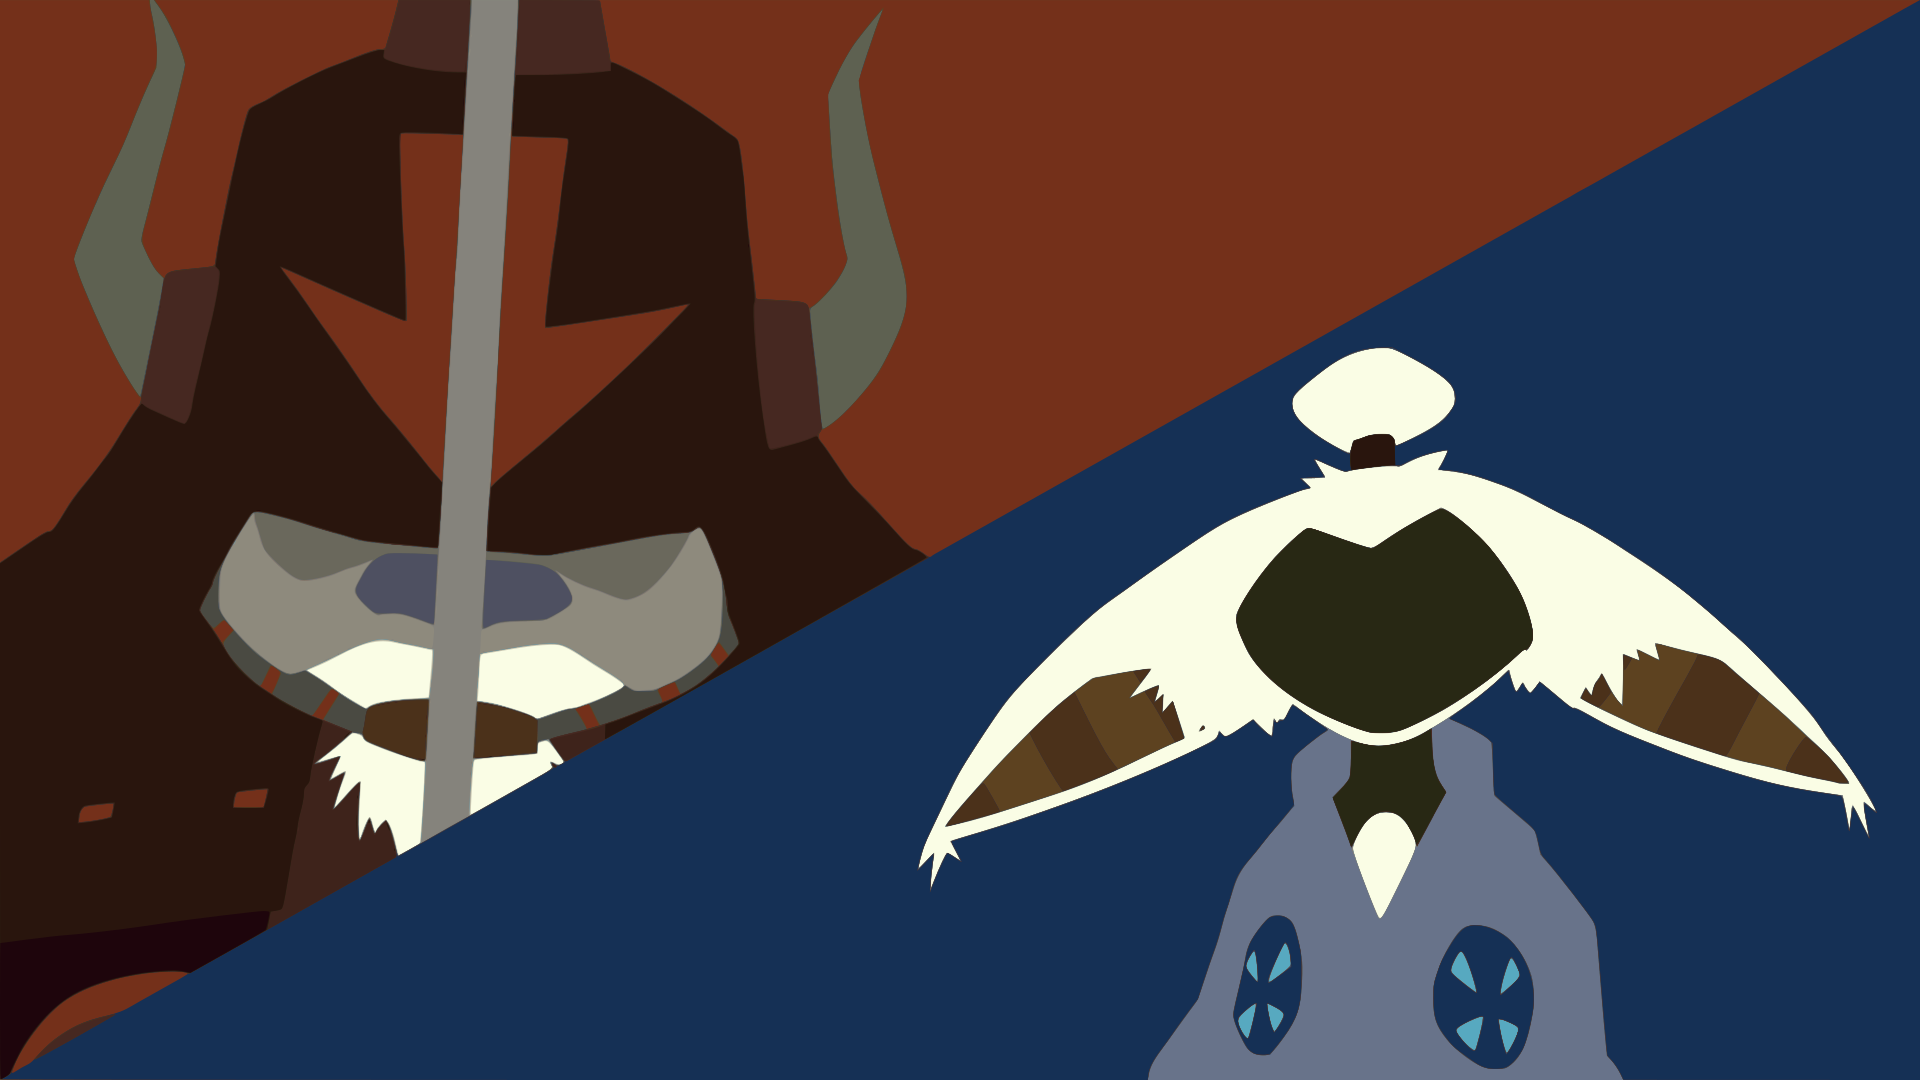 Appa v. Momo Minimalist Wallpaper by DamionMauville on.